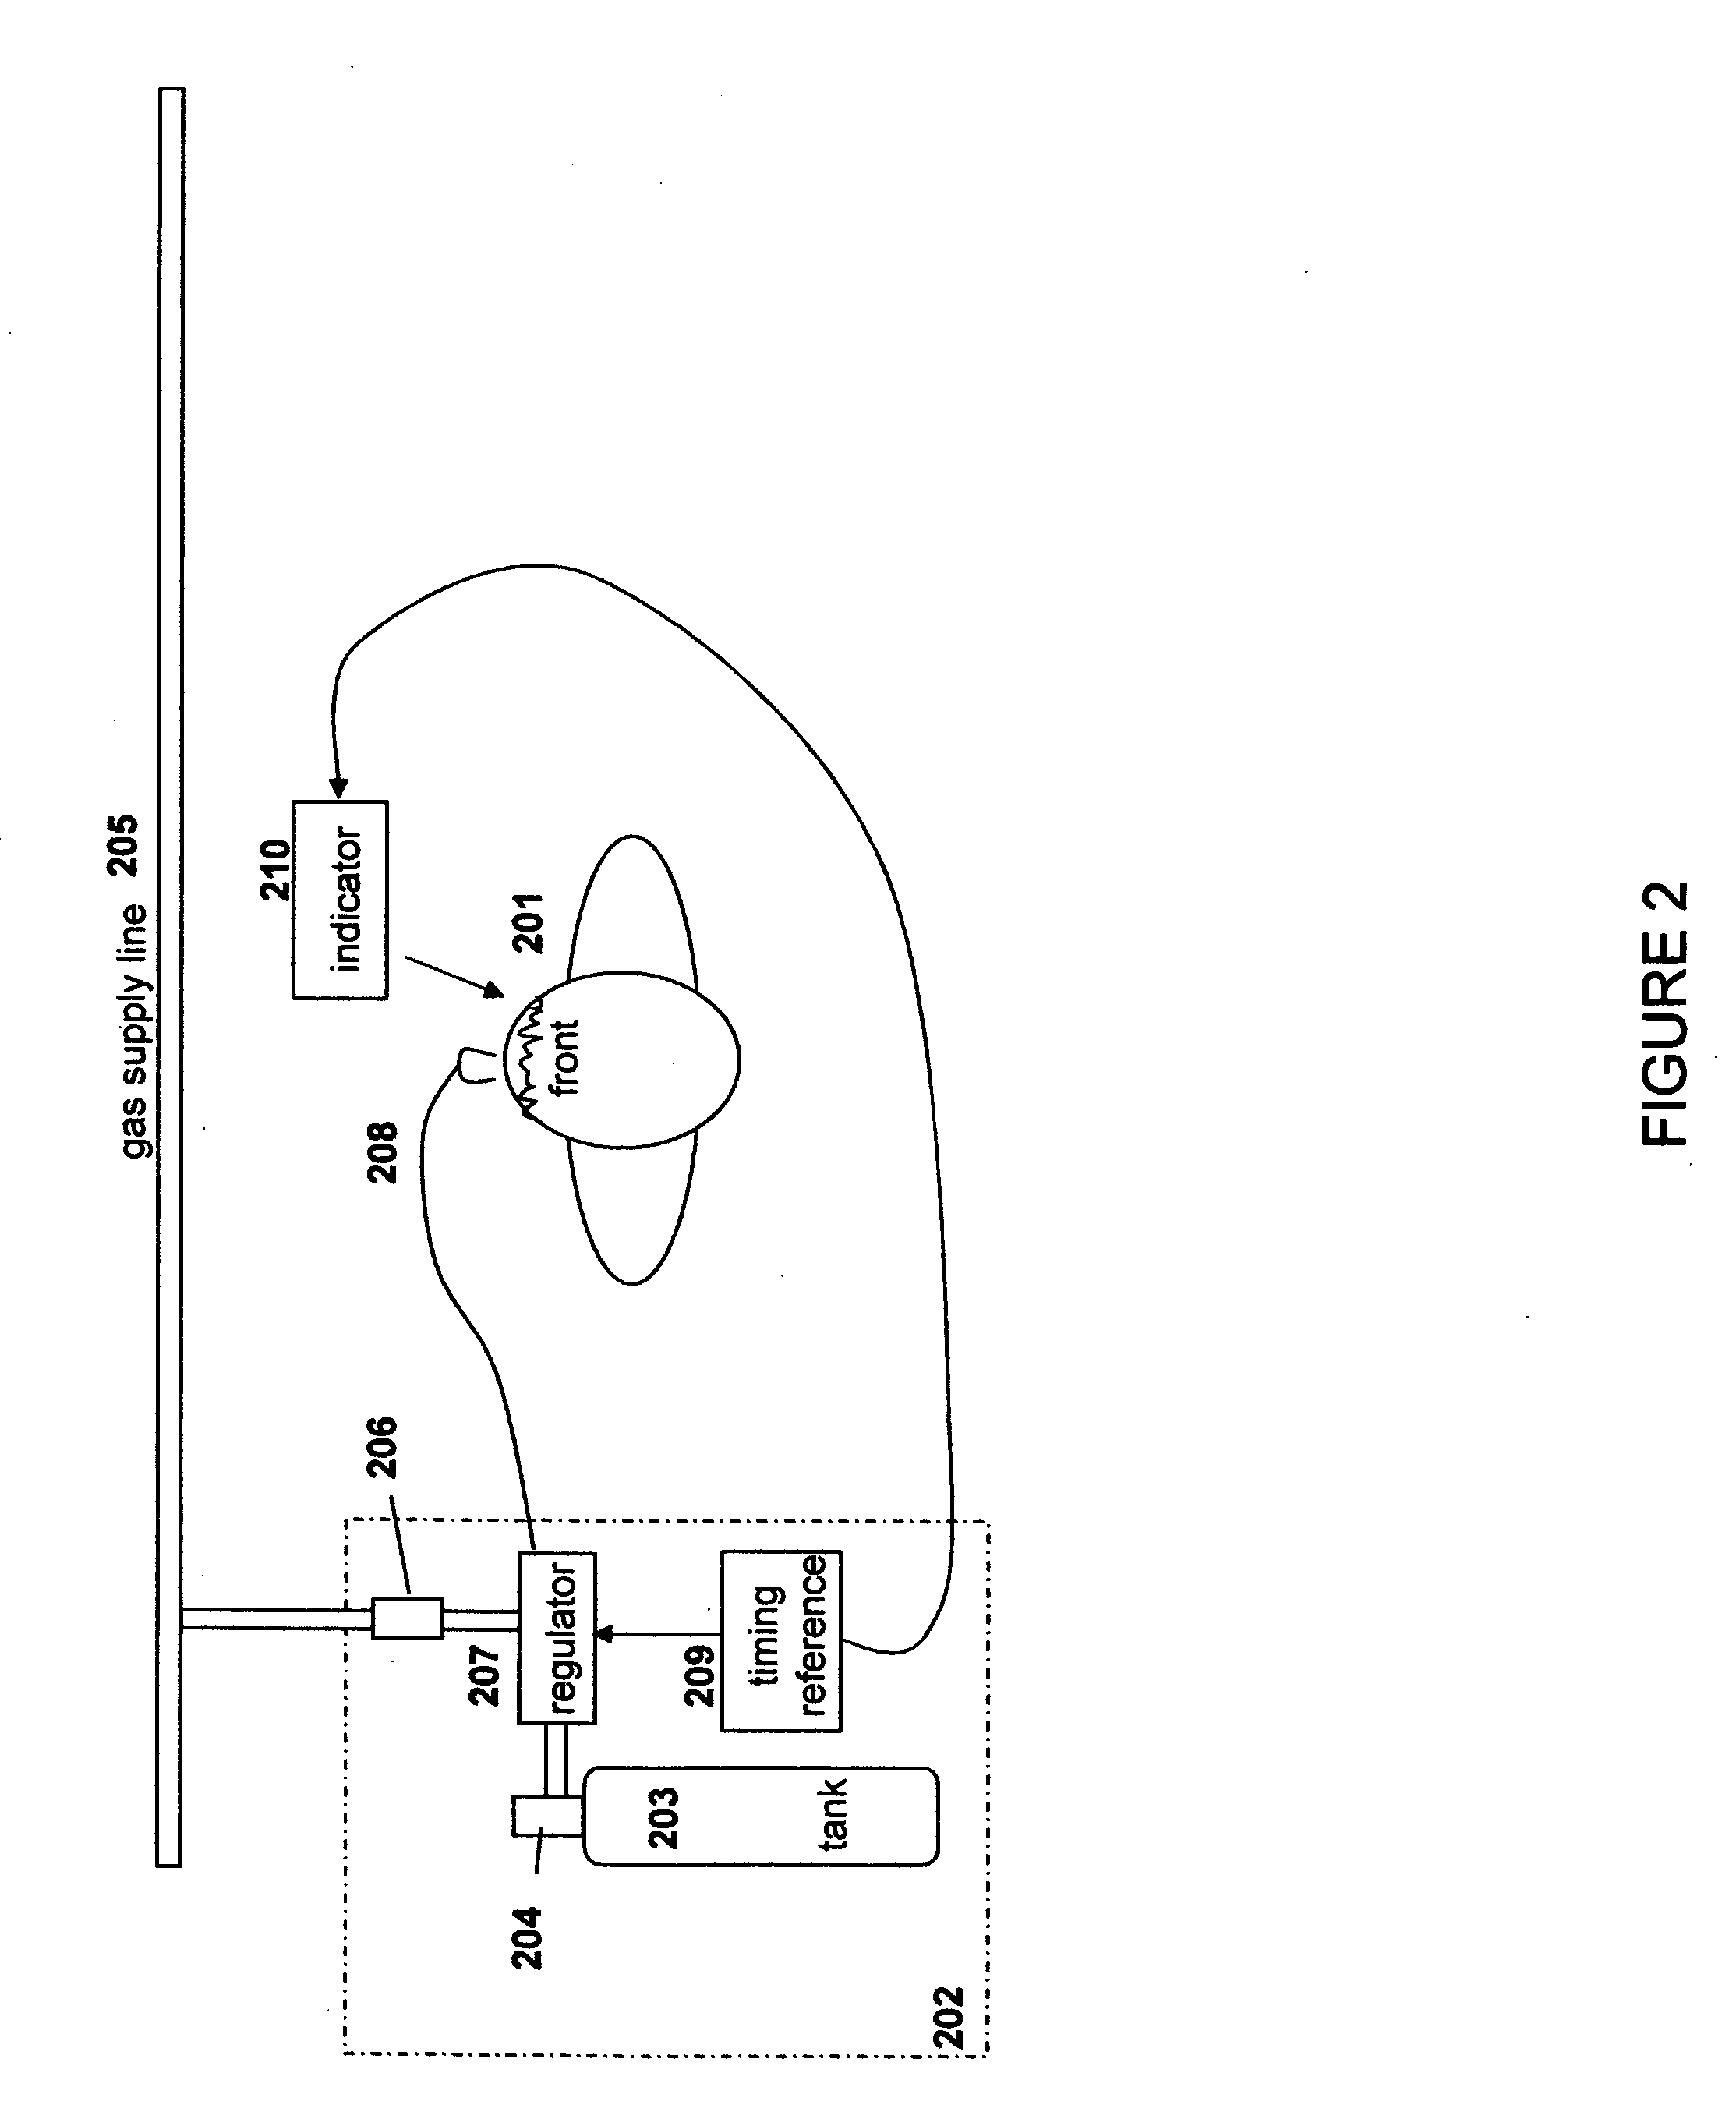 Method and system of respiratory therapy employing heart rate variability coherence